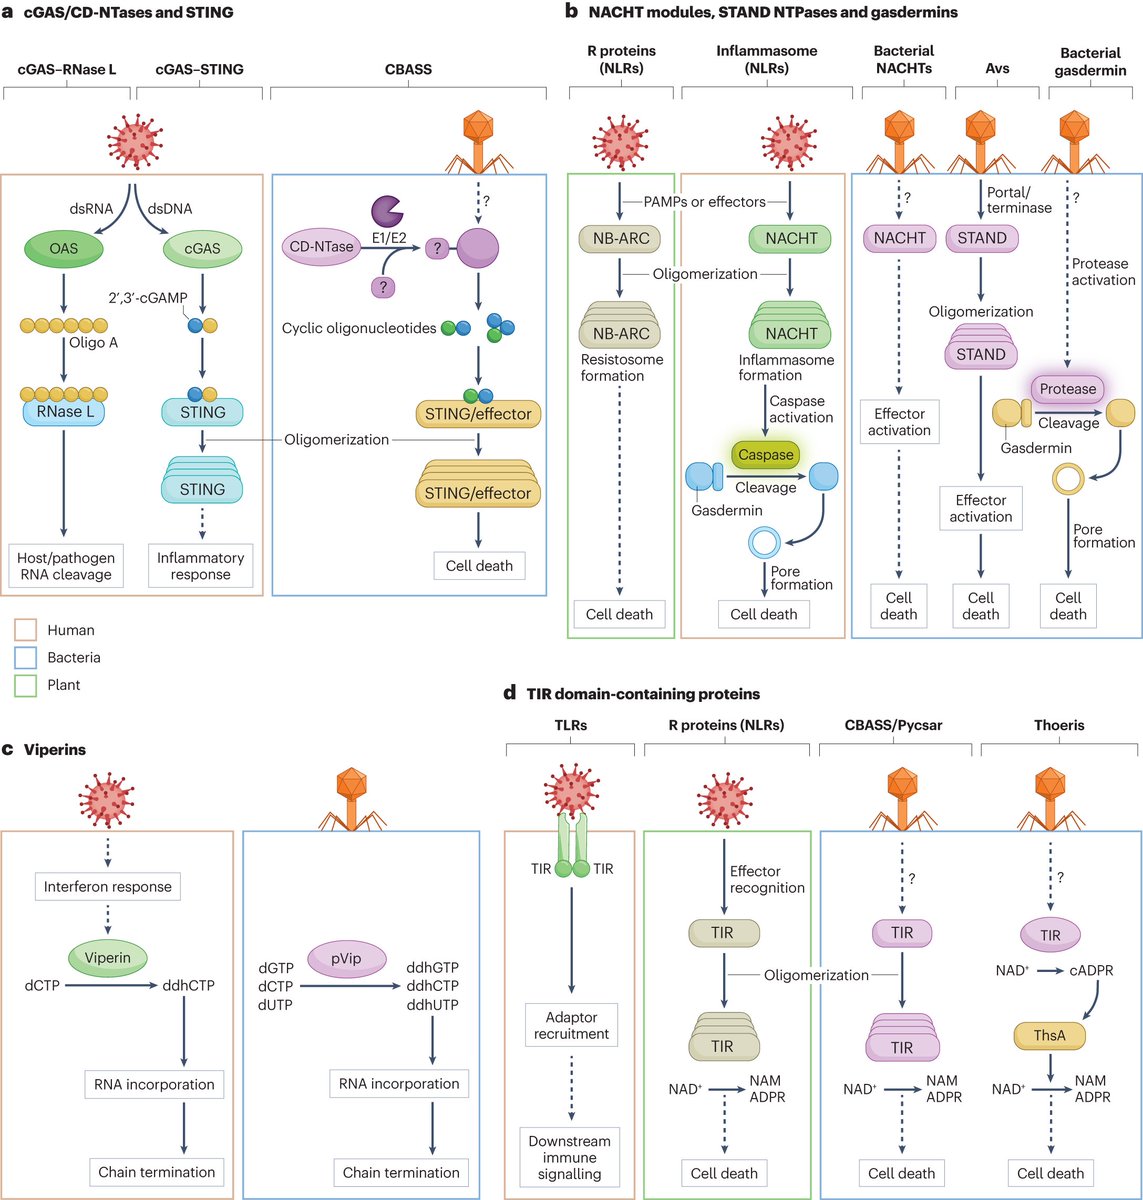 Conservation and similarity of bacterial and eukaryotic innate immunity rdcu.be/dzS7a @aaronwhiteley and @hannahledvina review the similarities between eukaryotic and bacterial innate immunity, exploring conserved components, signalling and restriction mechanisms.